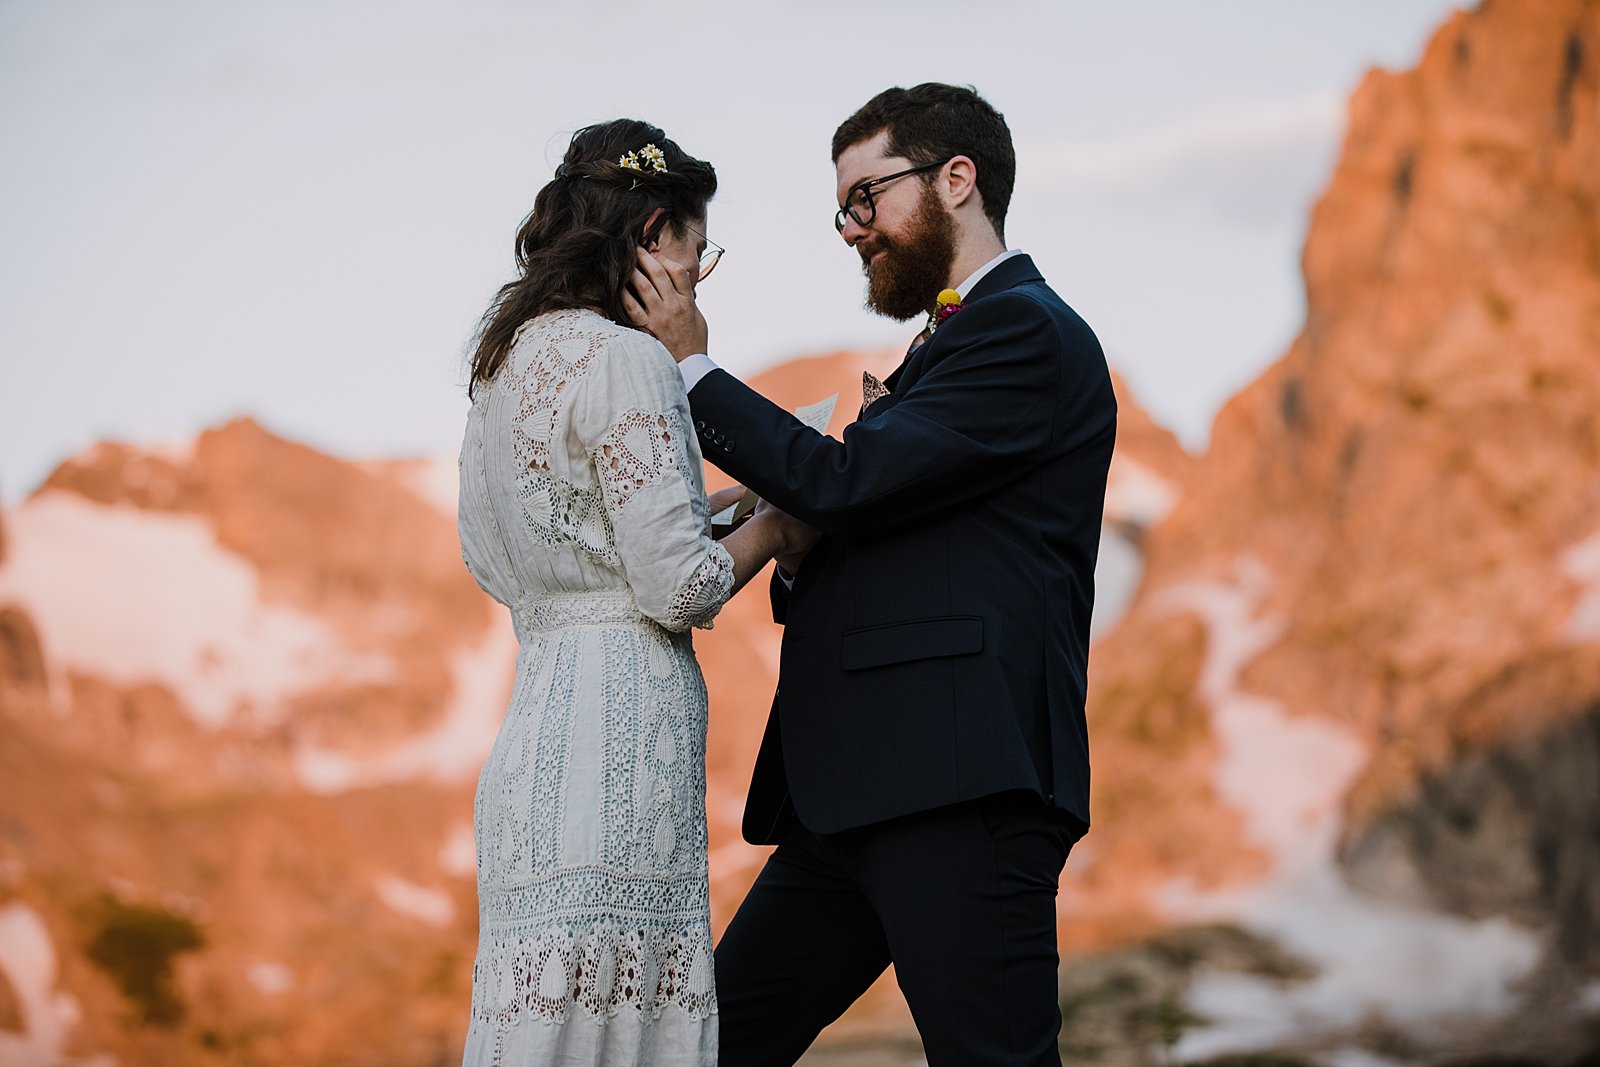 groom wiping away brides tear, colorado mountain alpenglow, sunrise in the indian peaks wilderness, intimate elopement ceremony, rocky mountain sunrise, pink mountains